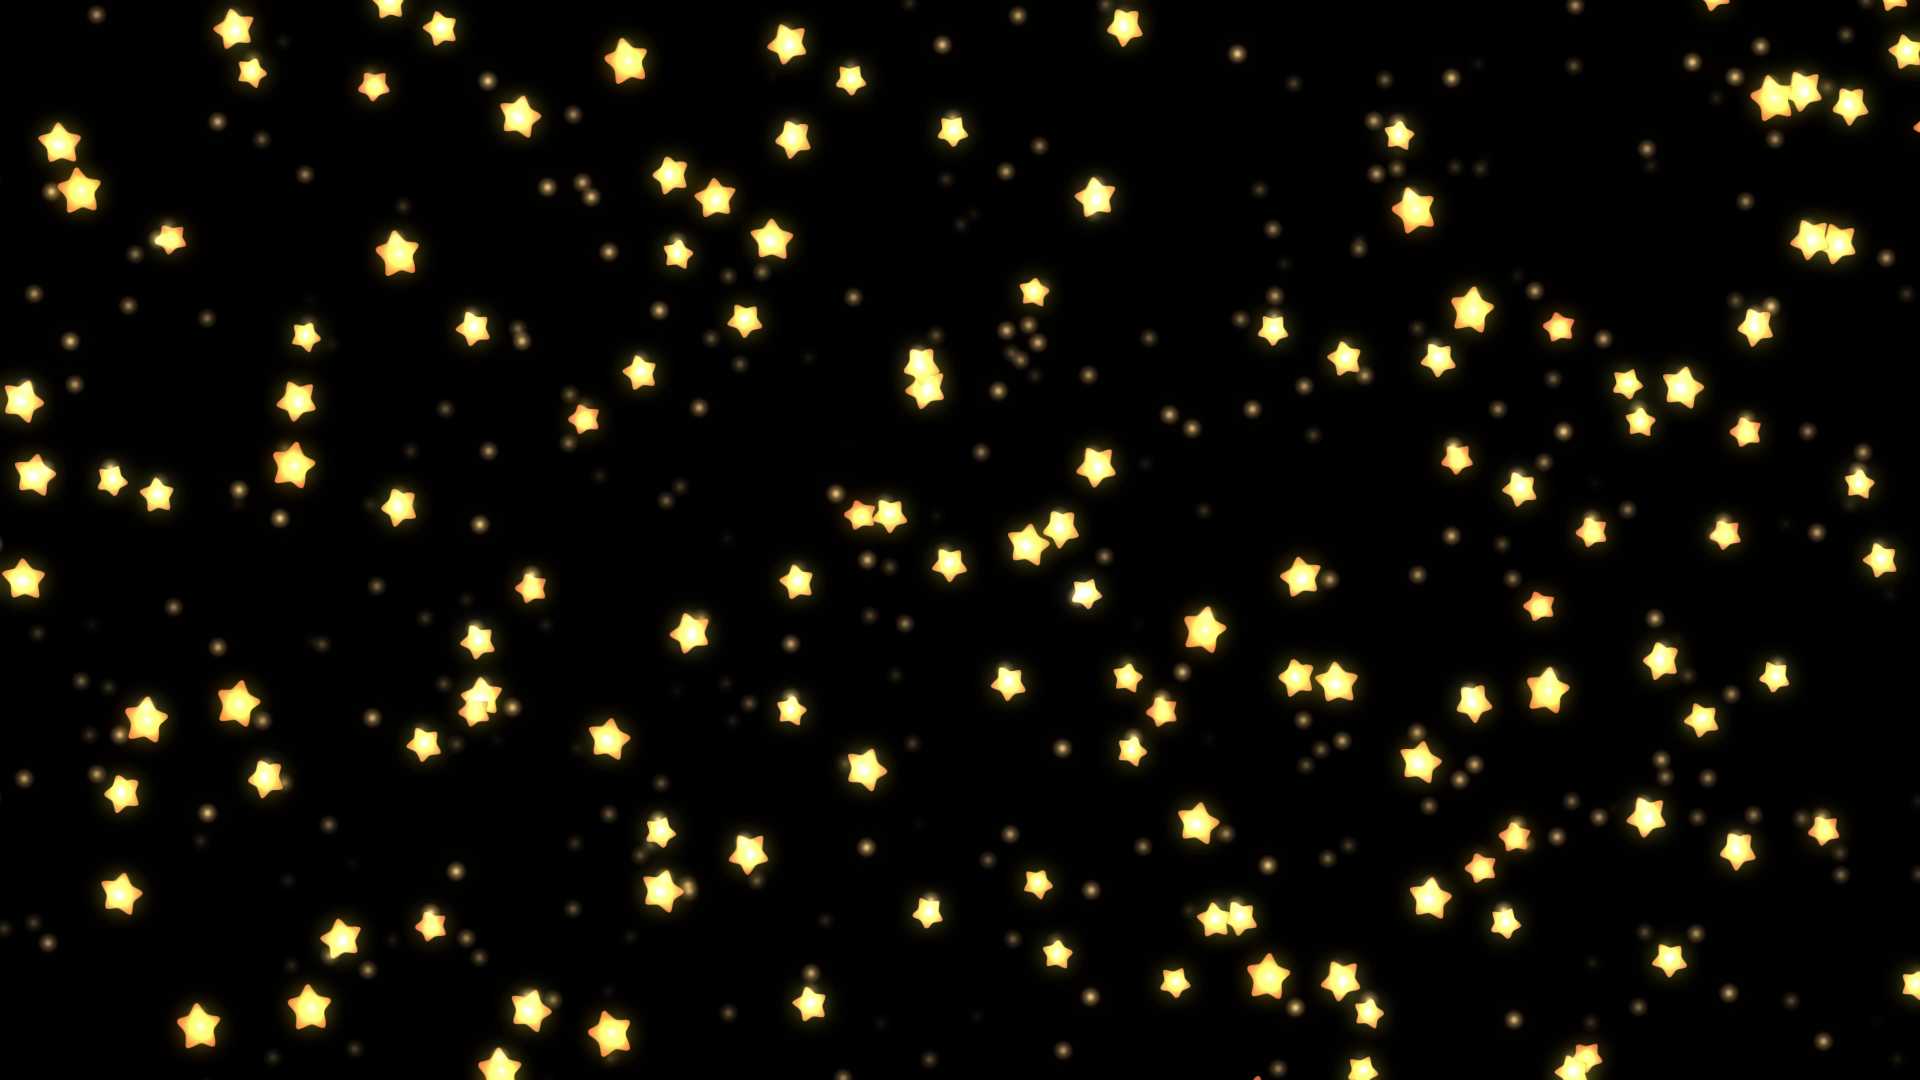 4K Floating Stars Overlay Effect Free Download || Overlay Effect For Editing